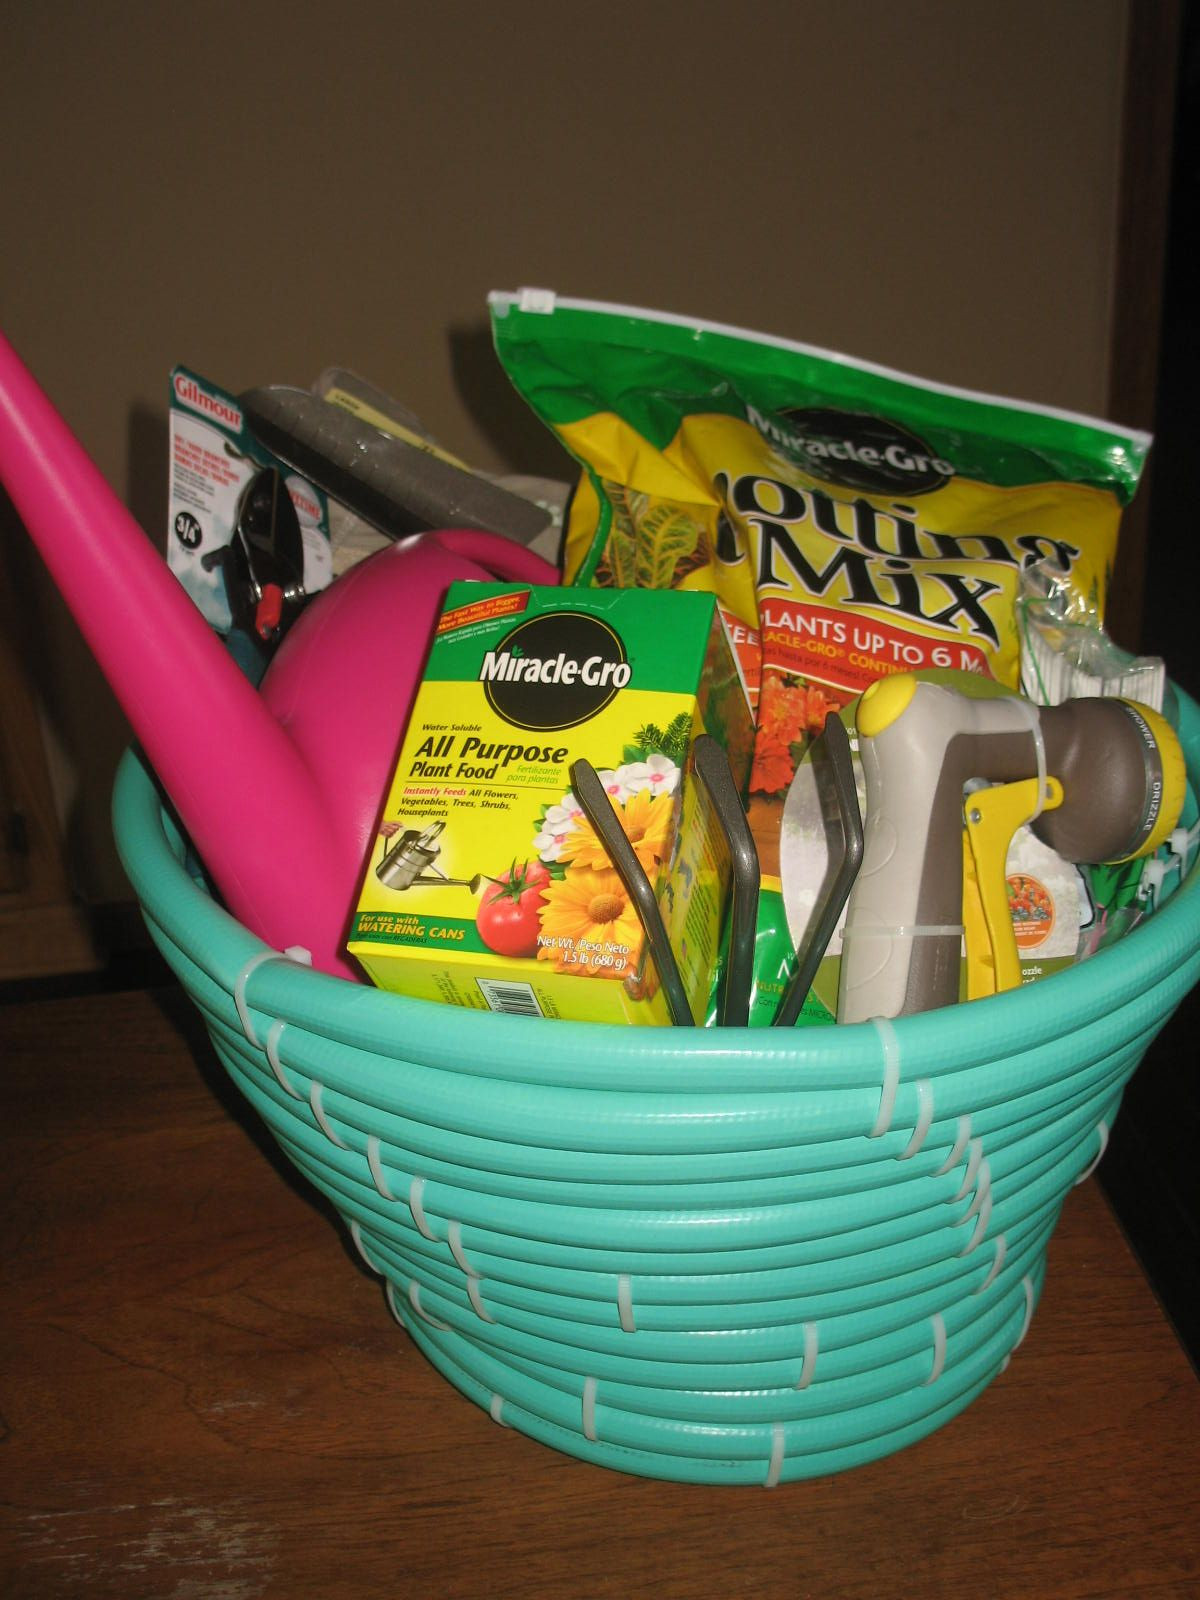 Outdoor Gift Basket Ideas
 Homemade hose gardeners t basket Perfect t for the